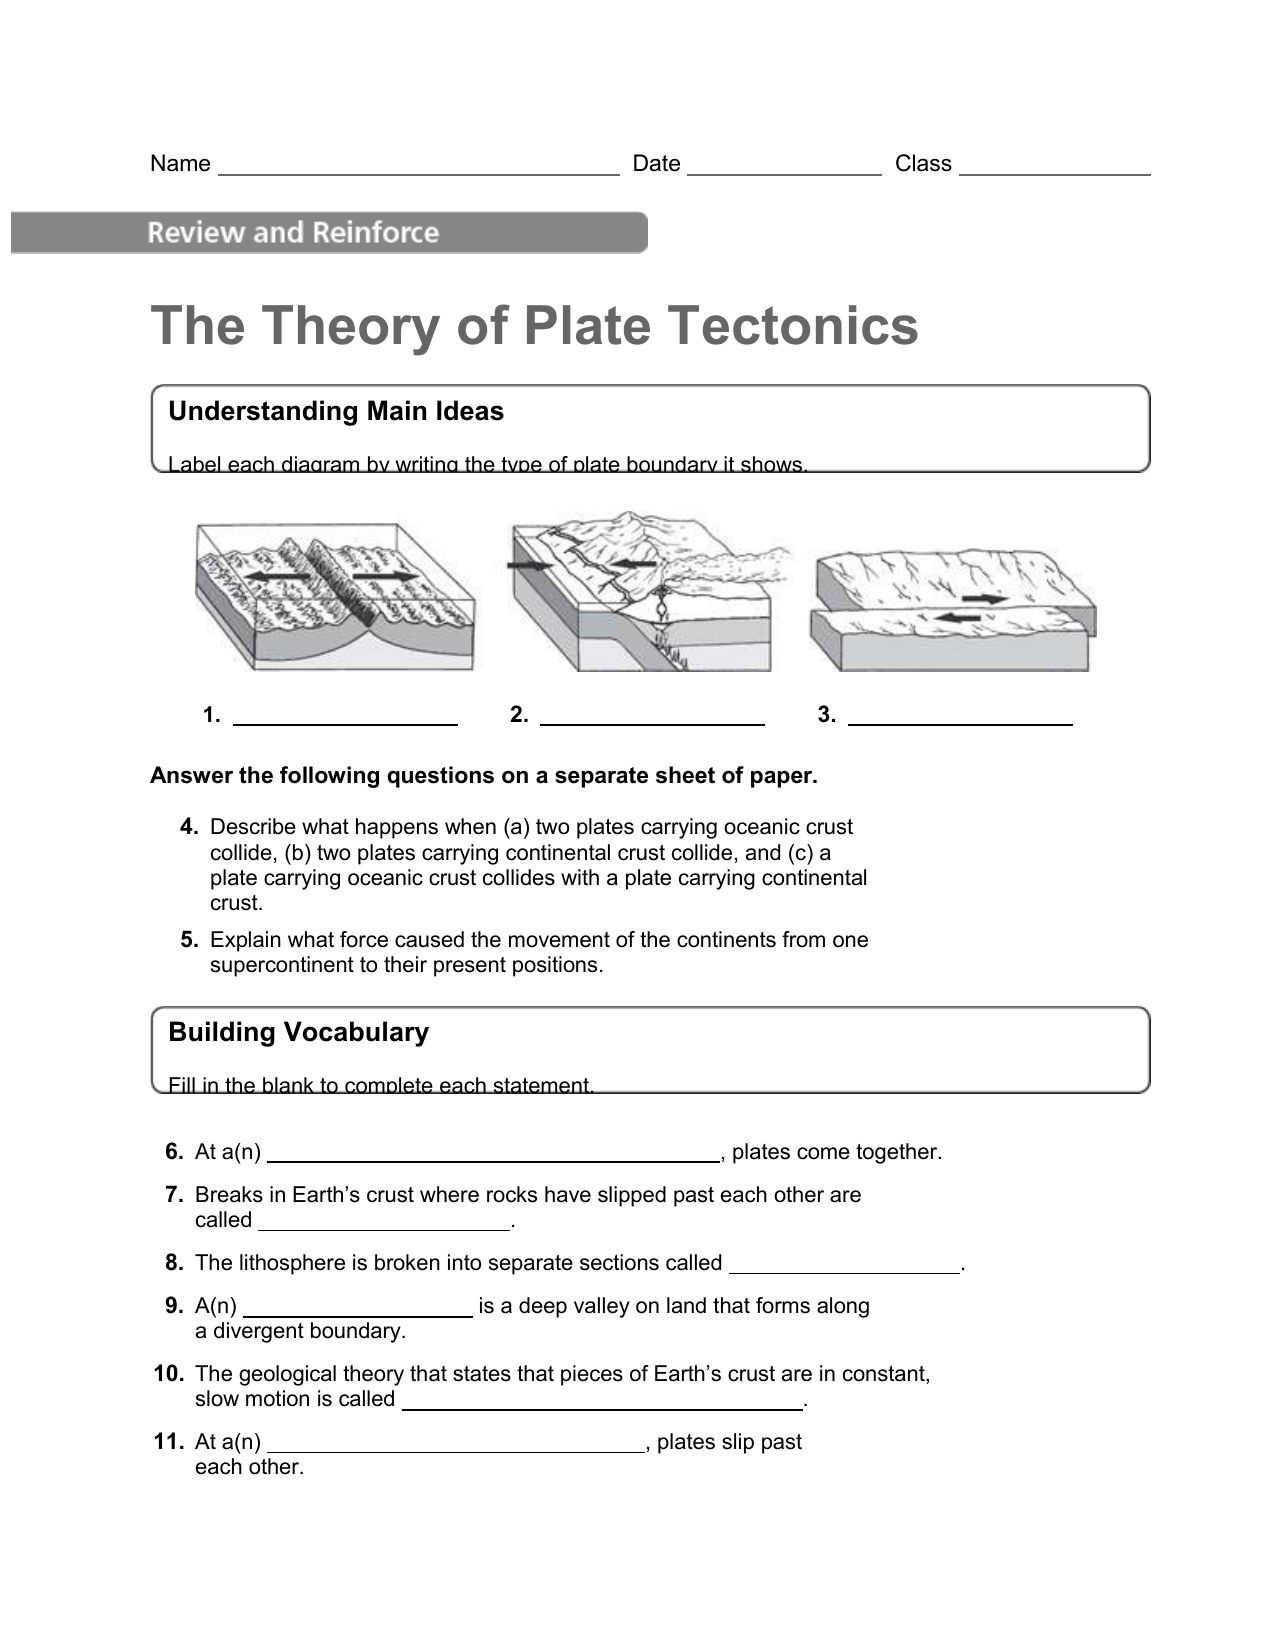 The Theory of Plate Tectonics Homework Throughout Plate Tectonics Worksheet Answers